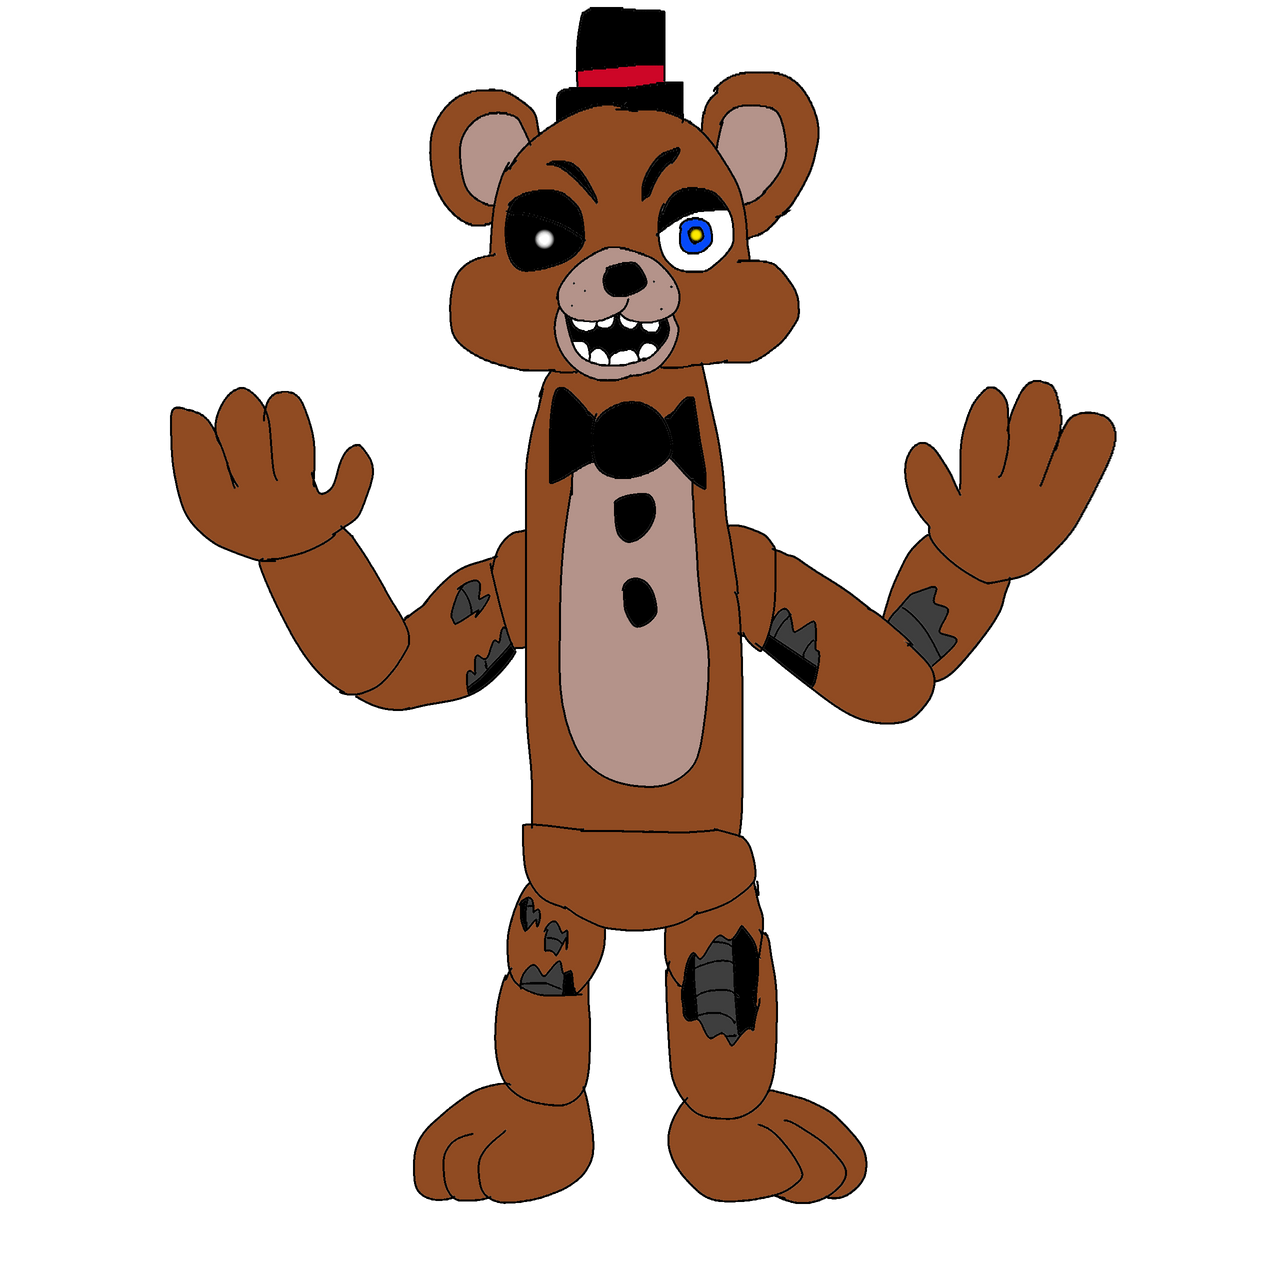 Five Nights At Freddy's 2 Roblox Drawing The Withered Arm PNG